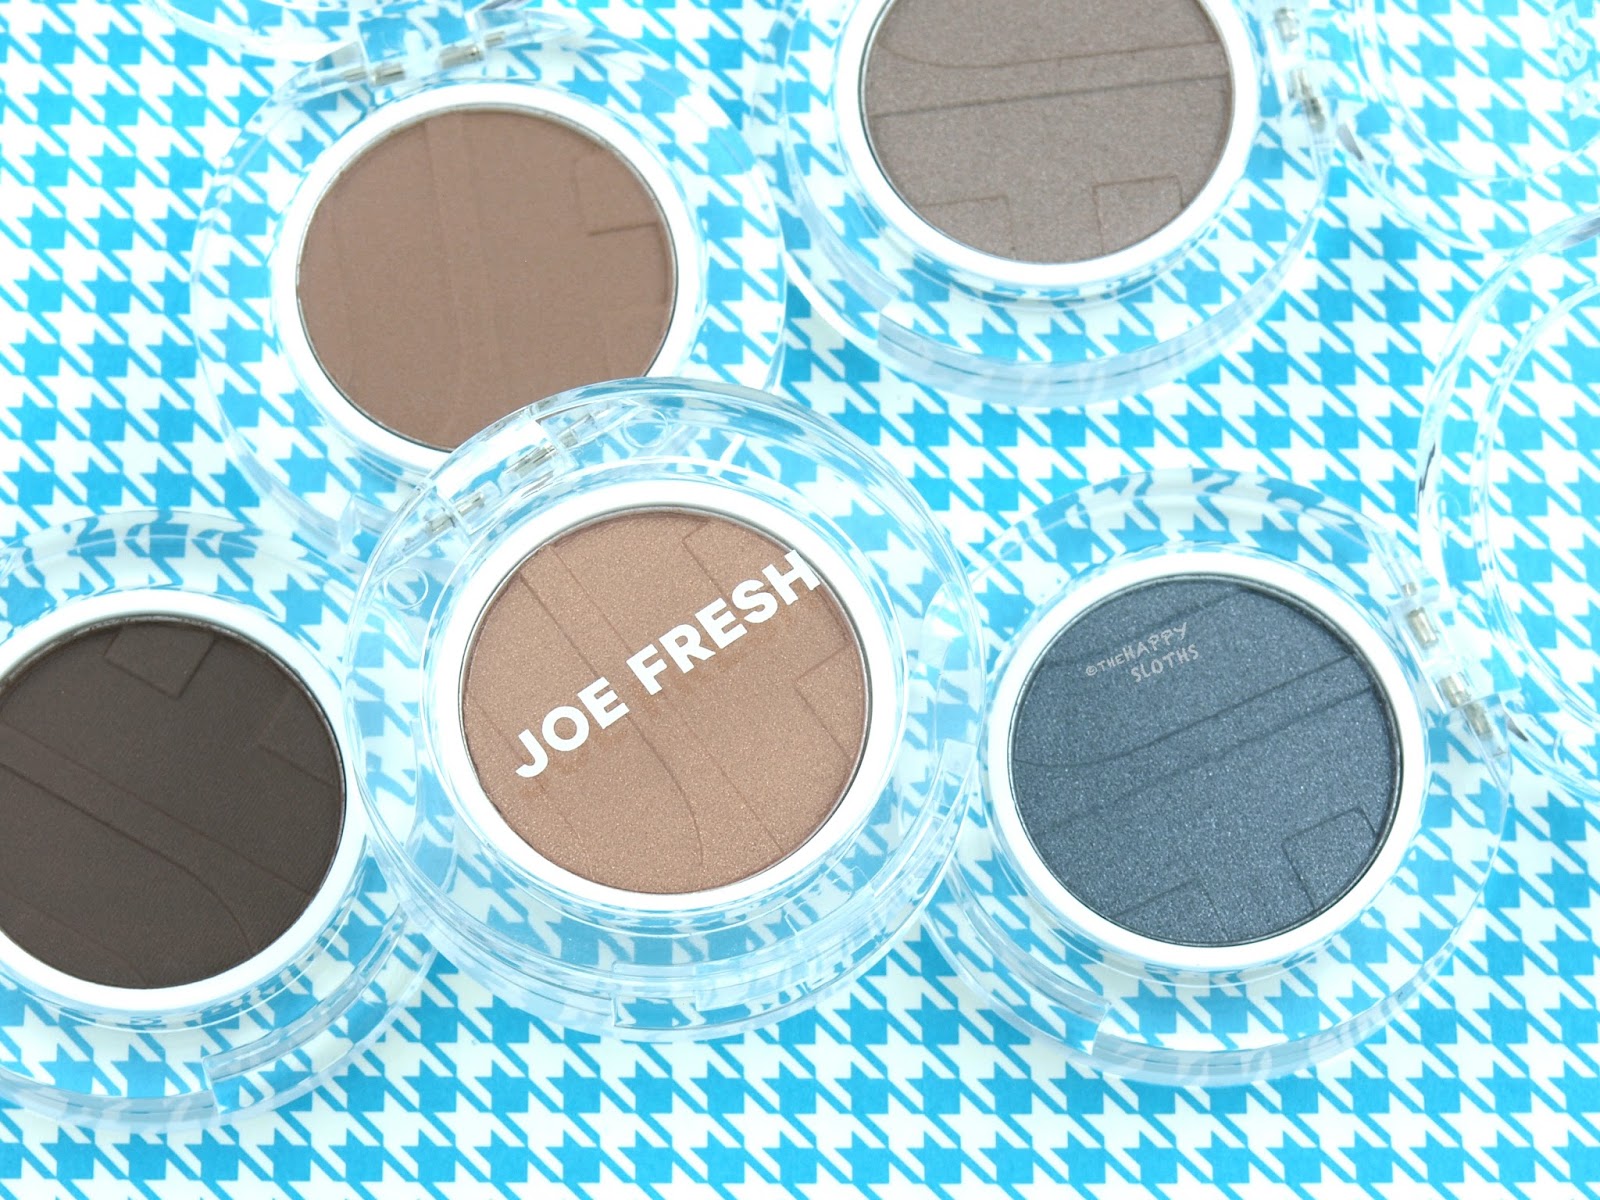 Joe Fresh Beauty Single Eyeshadows: Review and Swatches